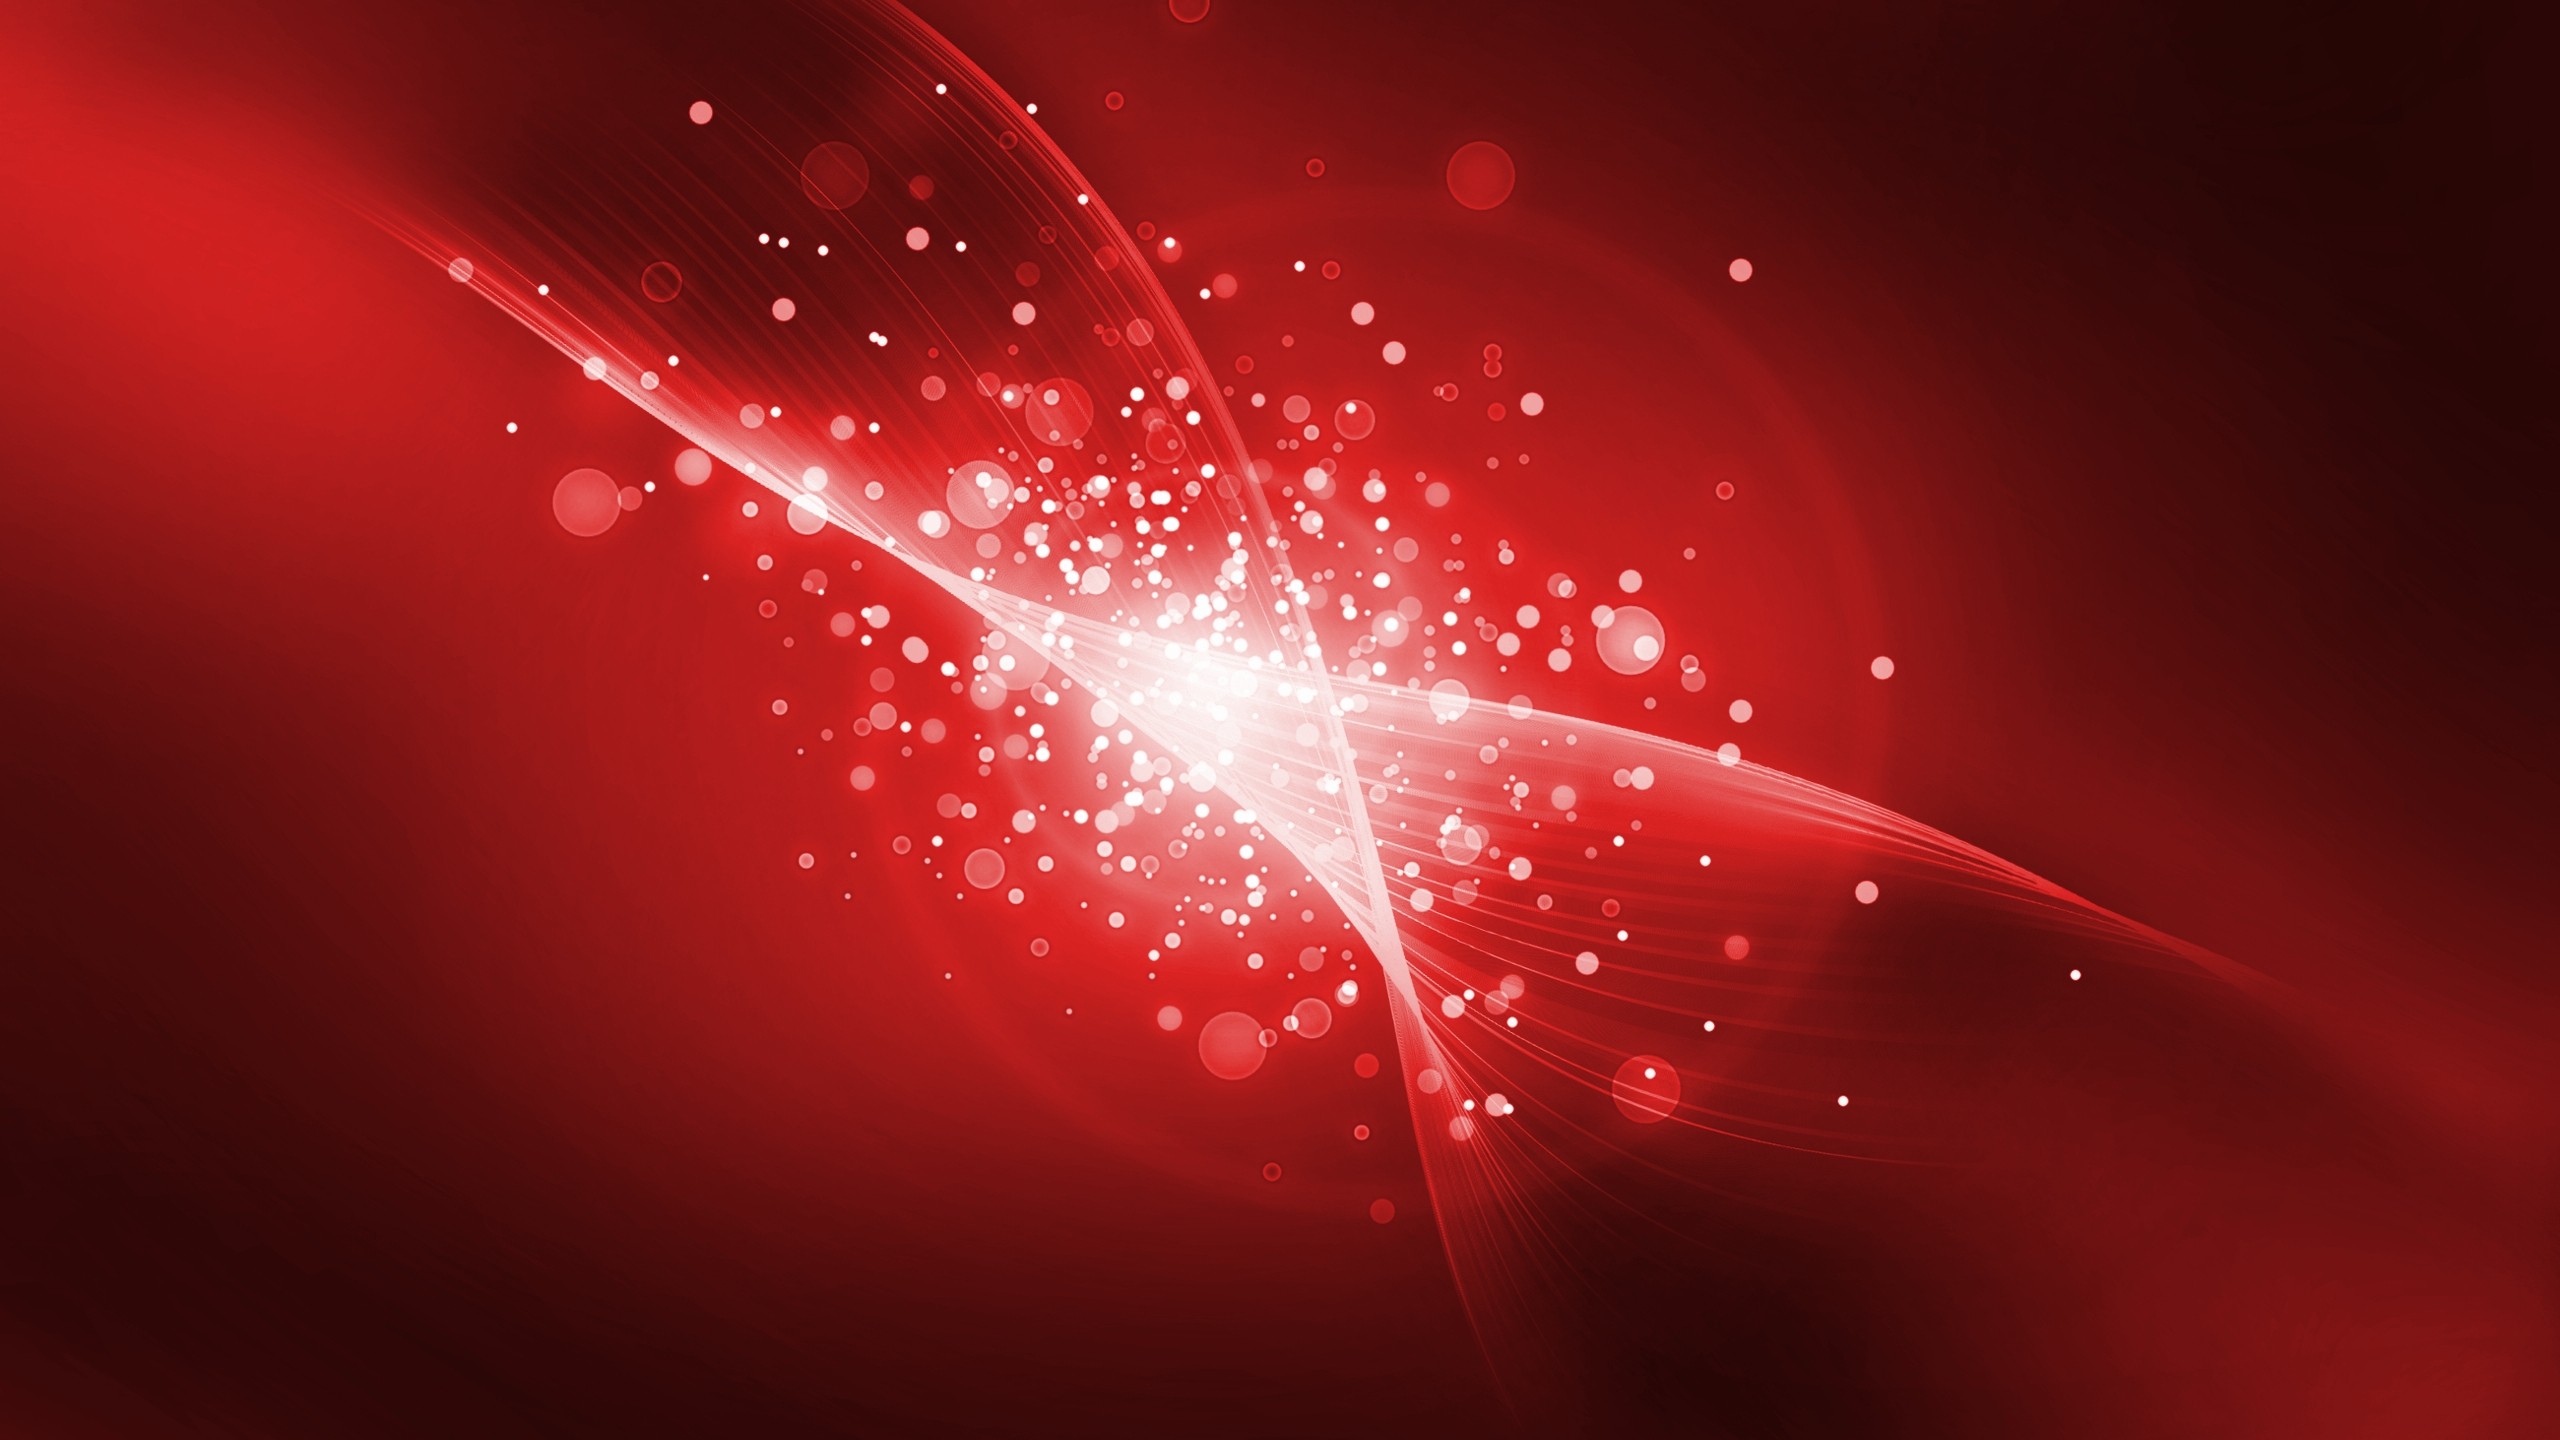 Abstract Red Wallpaper 2560x1440 Abstract Red Wall 2560x1440